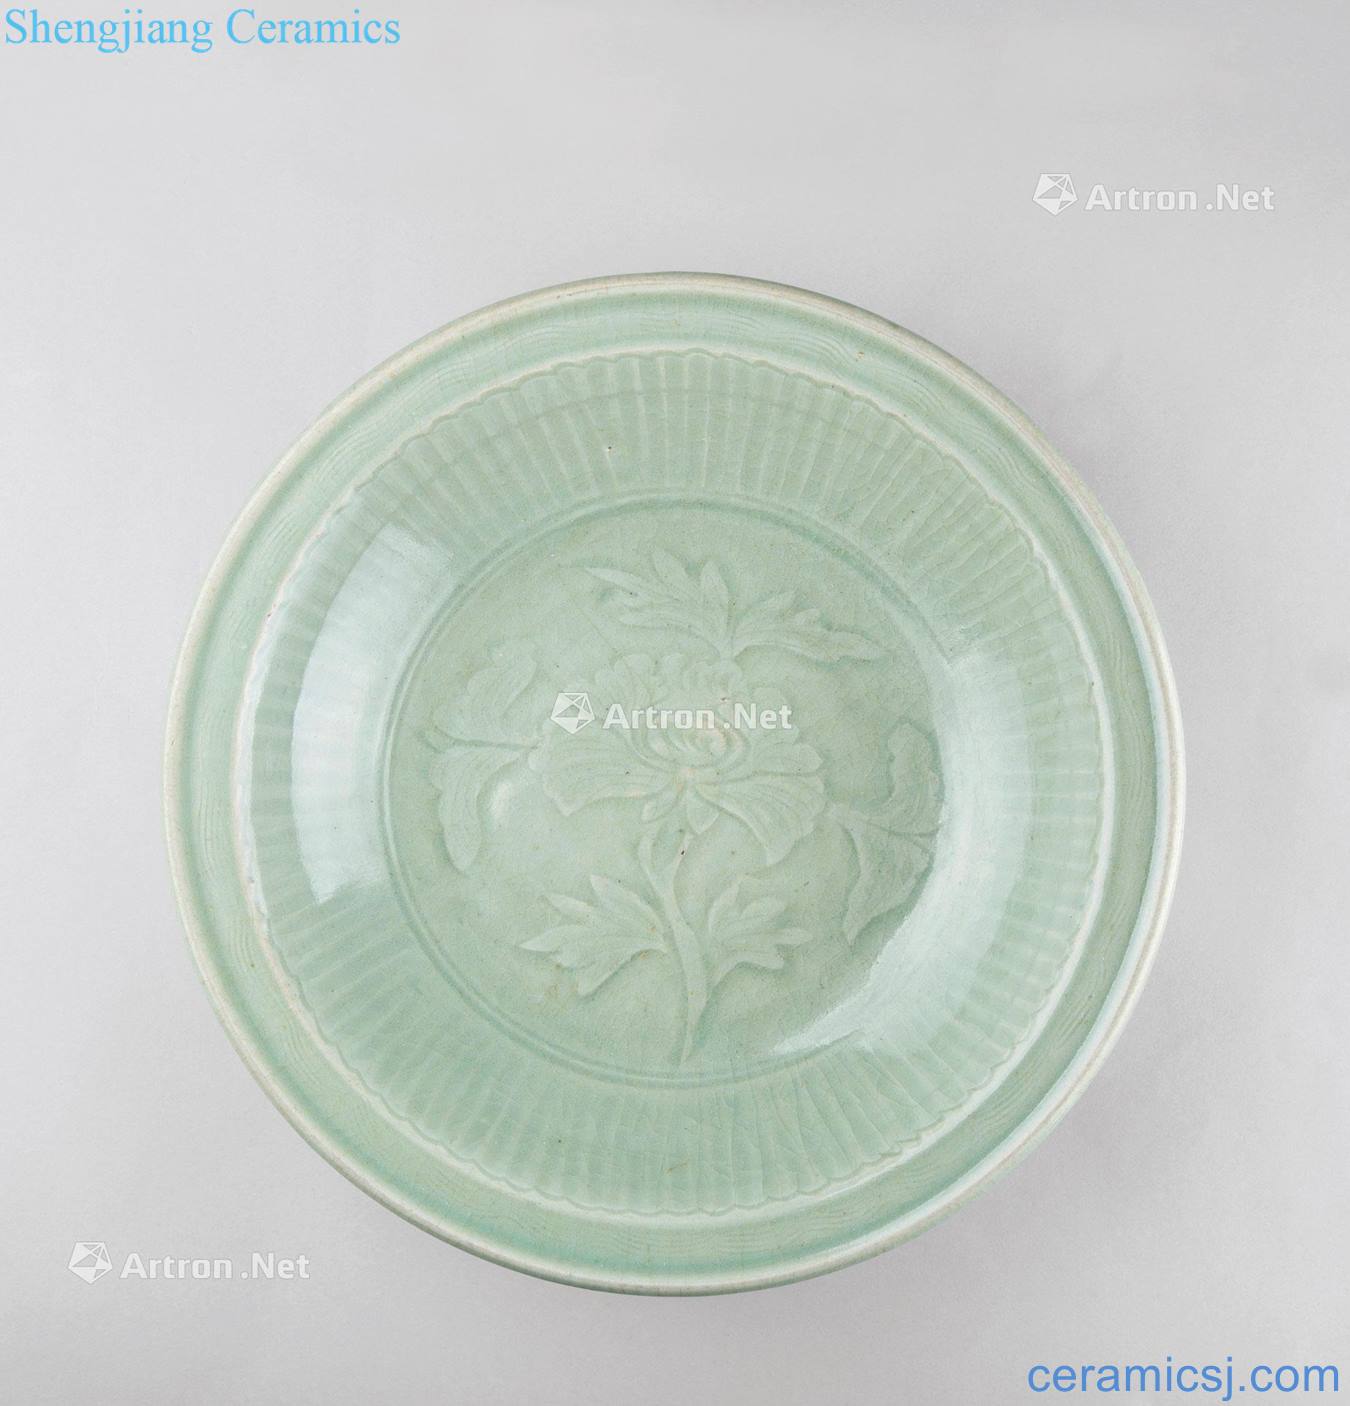 The yuan dynasty blue magnetic flower tray